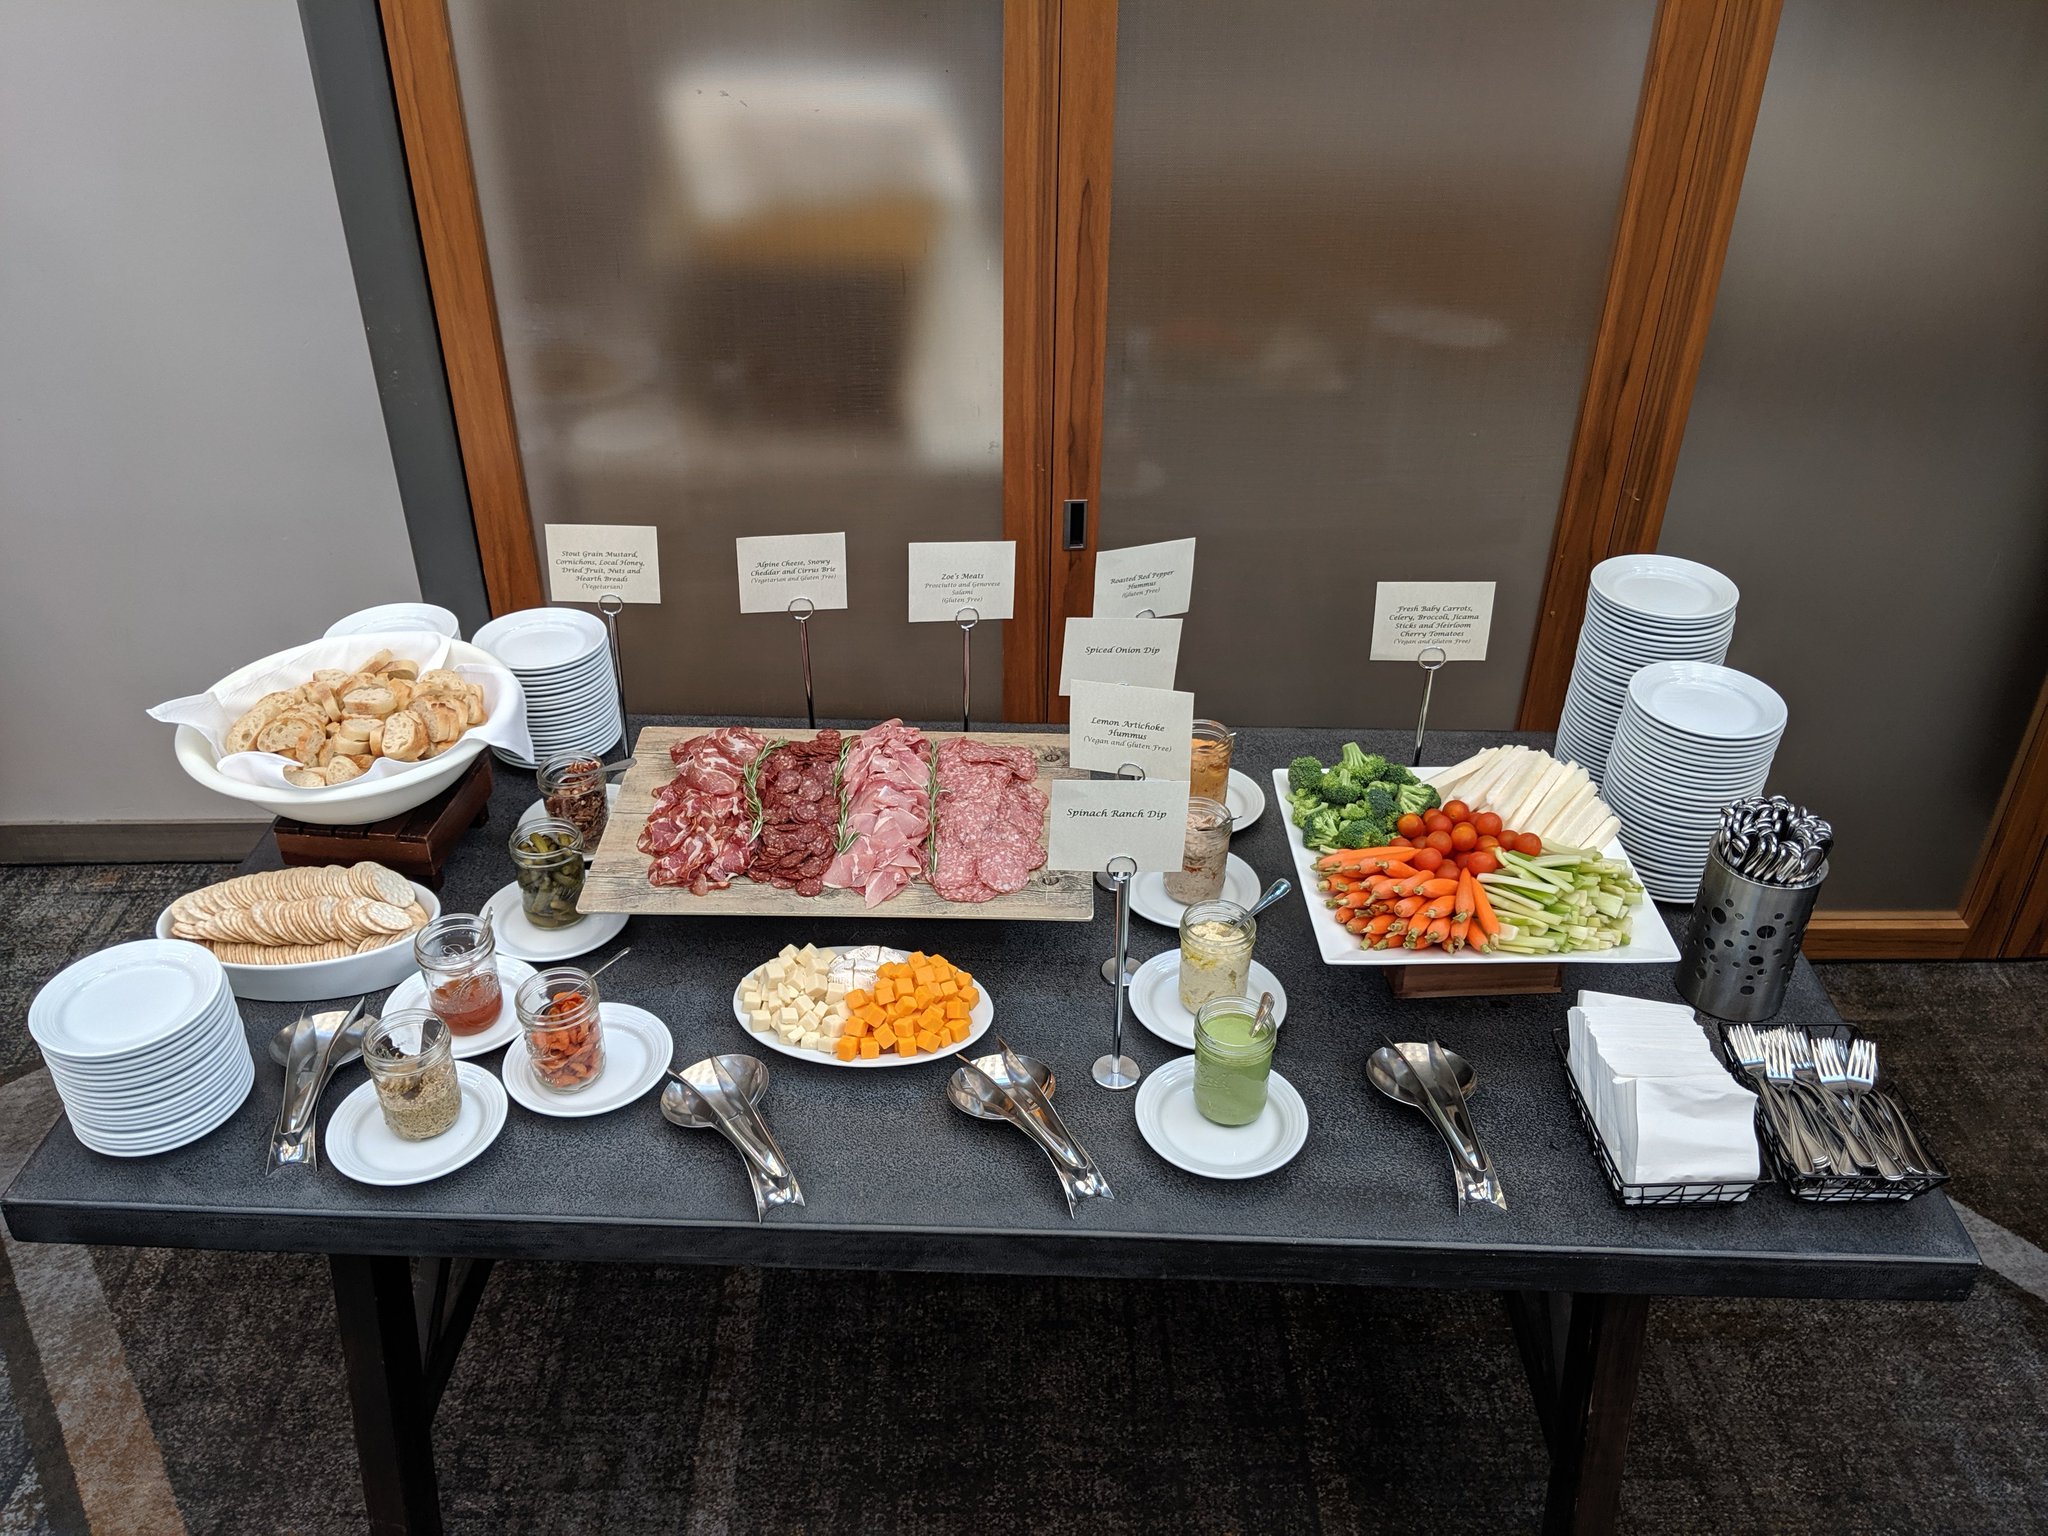 Roblox Developer Relations On Twitter Dinner Is Served Help Yourself To Some Food And Mingle With Your Fellow Developers It S Party Time Rdc2019 - roblox developer relations on twitter daily rewards are a good